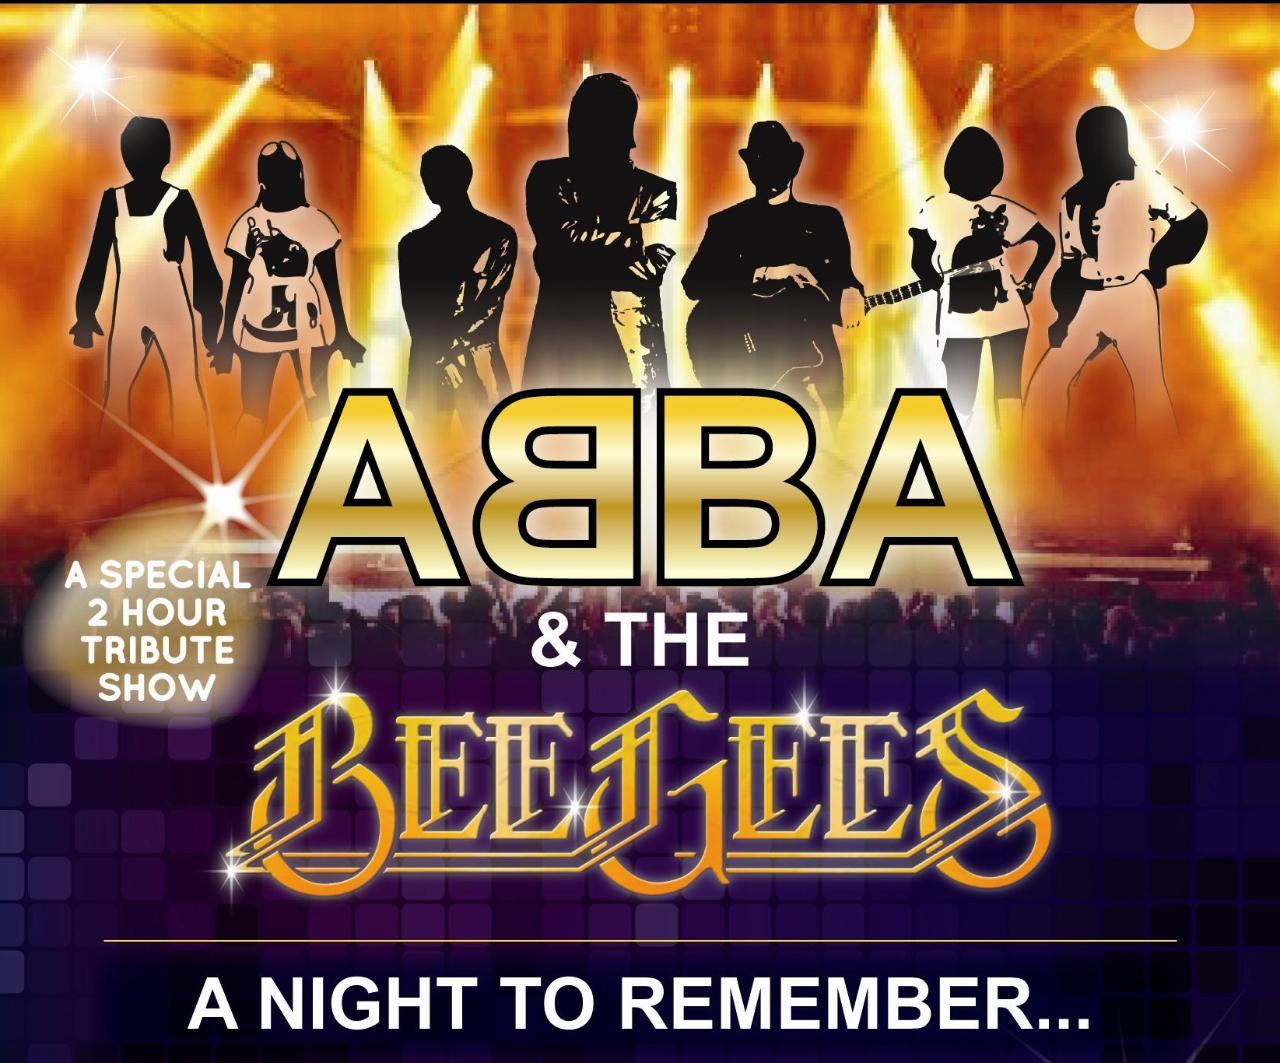 ABBA & Bee Gees 'A Night to Remember' show live The Old Butter